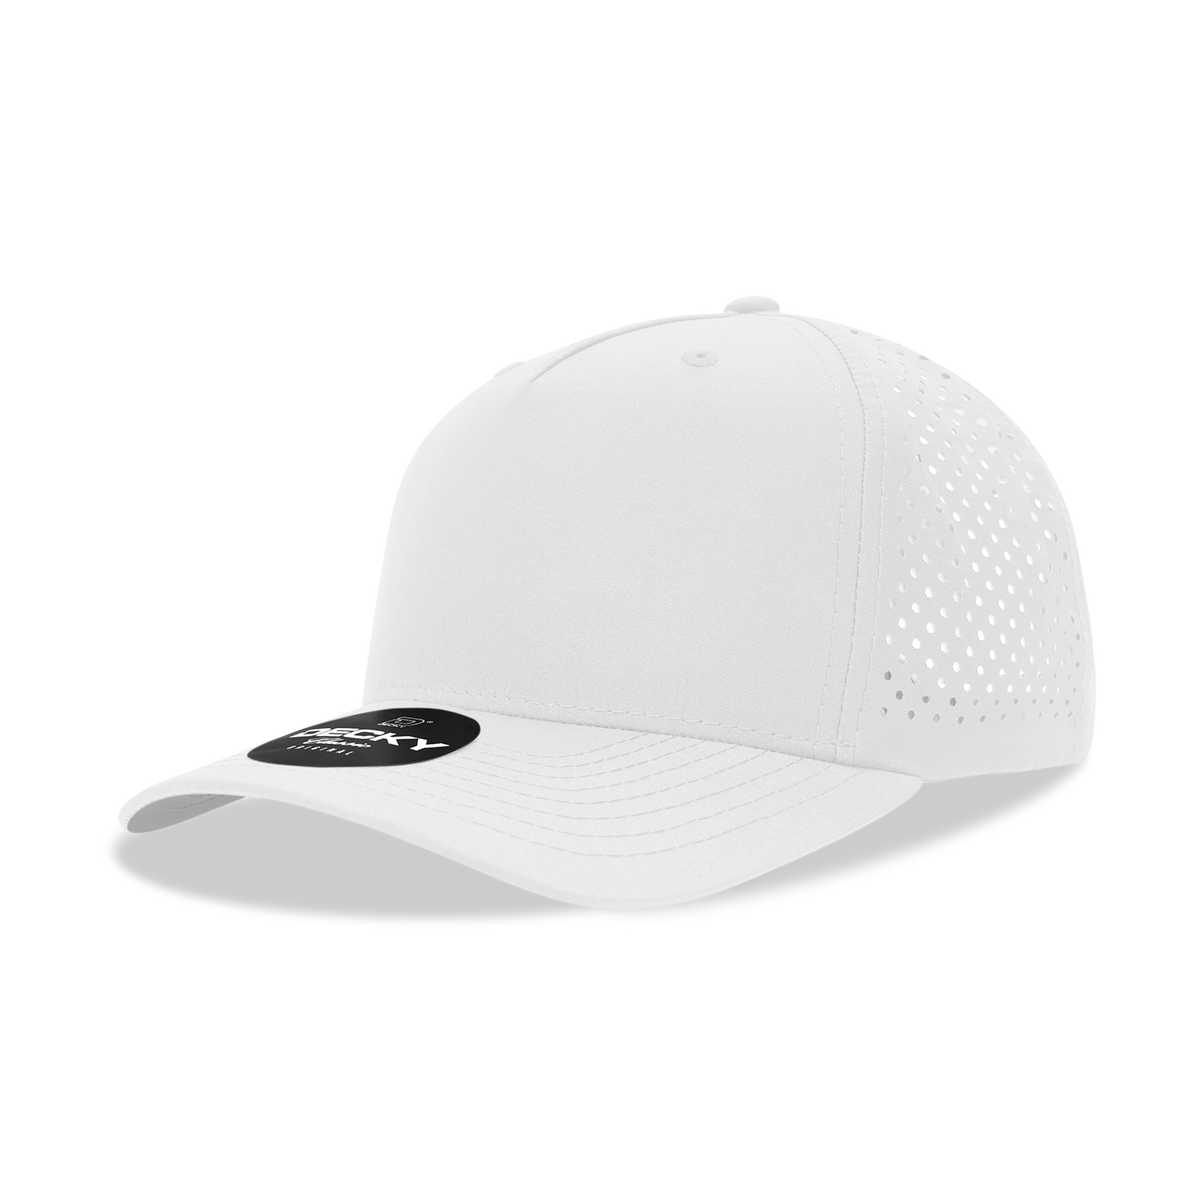 Decky 6225 5 Panel Mid Profile Structured Perforated Performance Cap ...